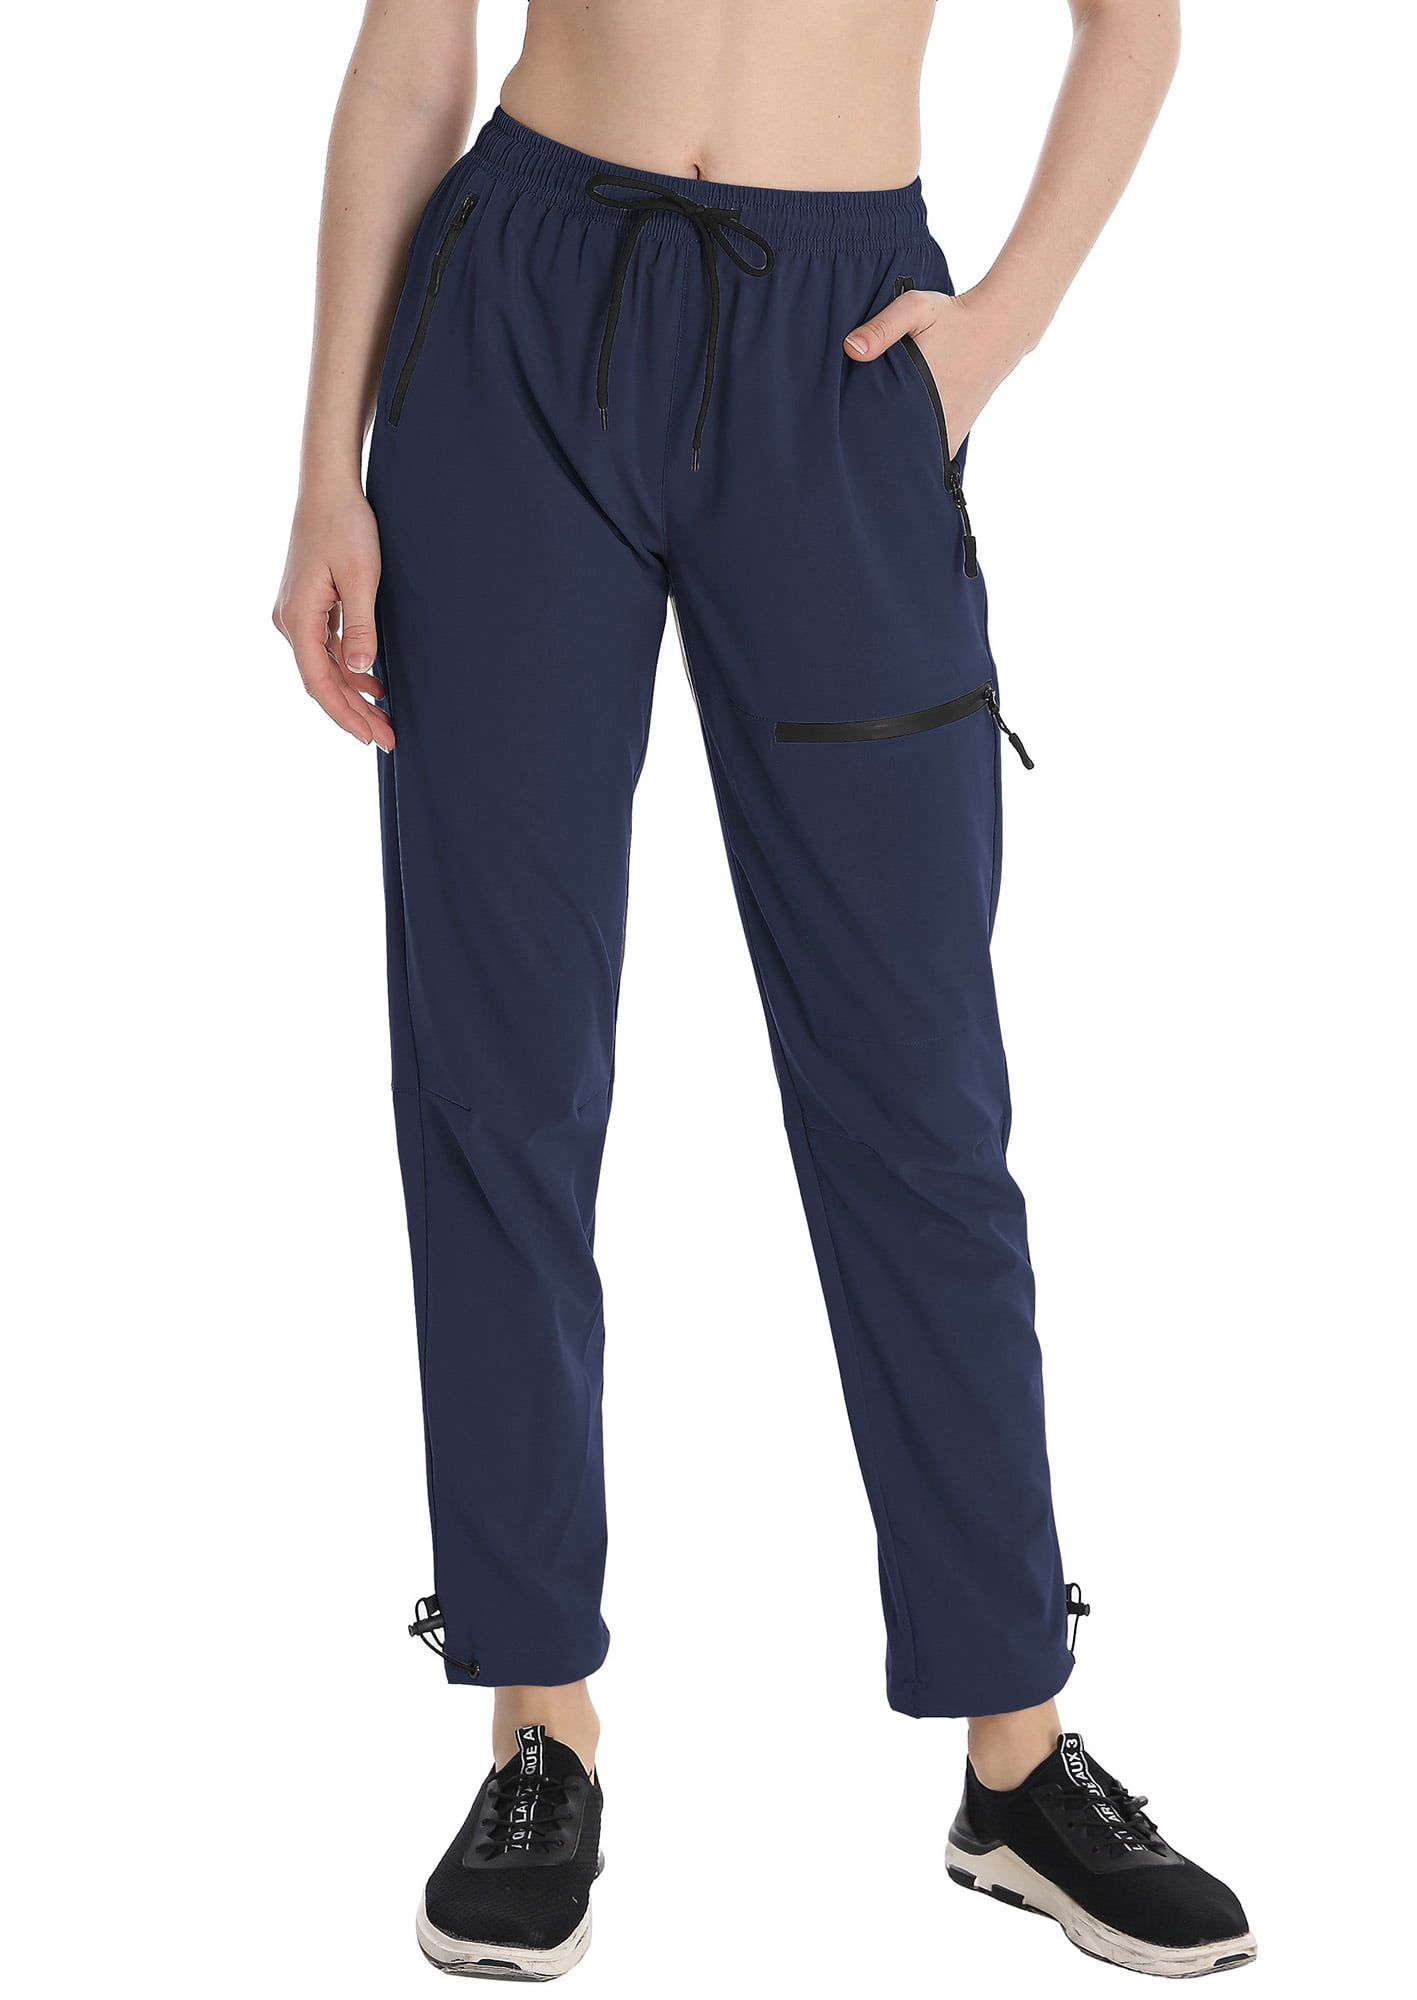 BALEAF Womens Hiking Pants, Quick Dry Water Resistant - Import It All